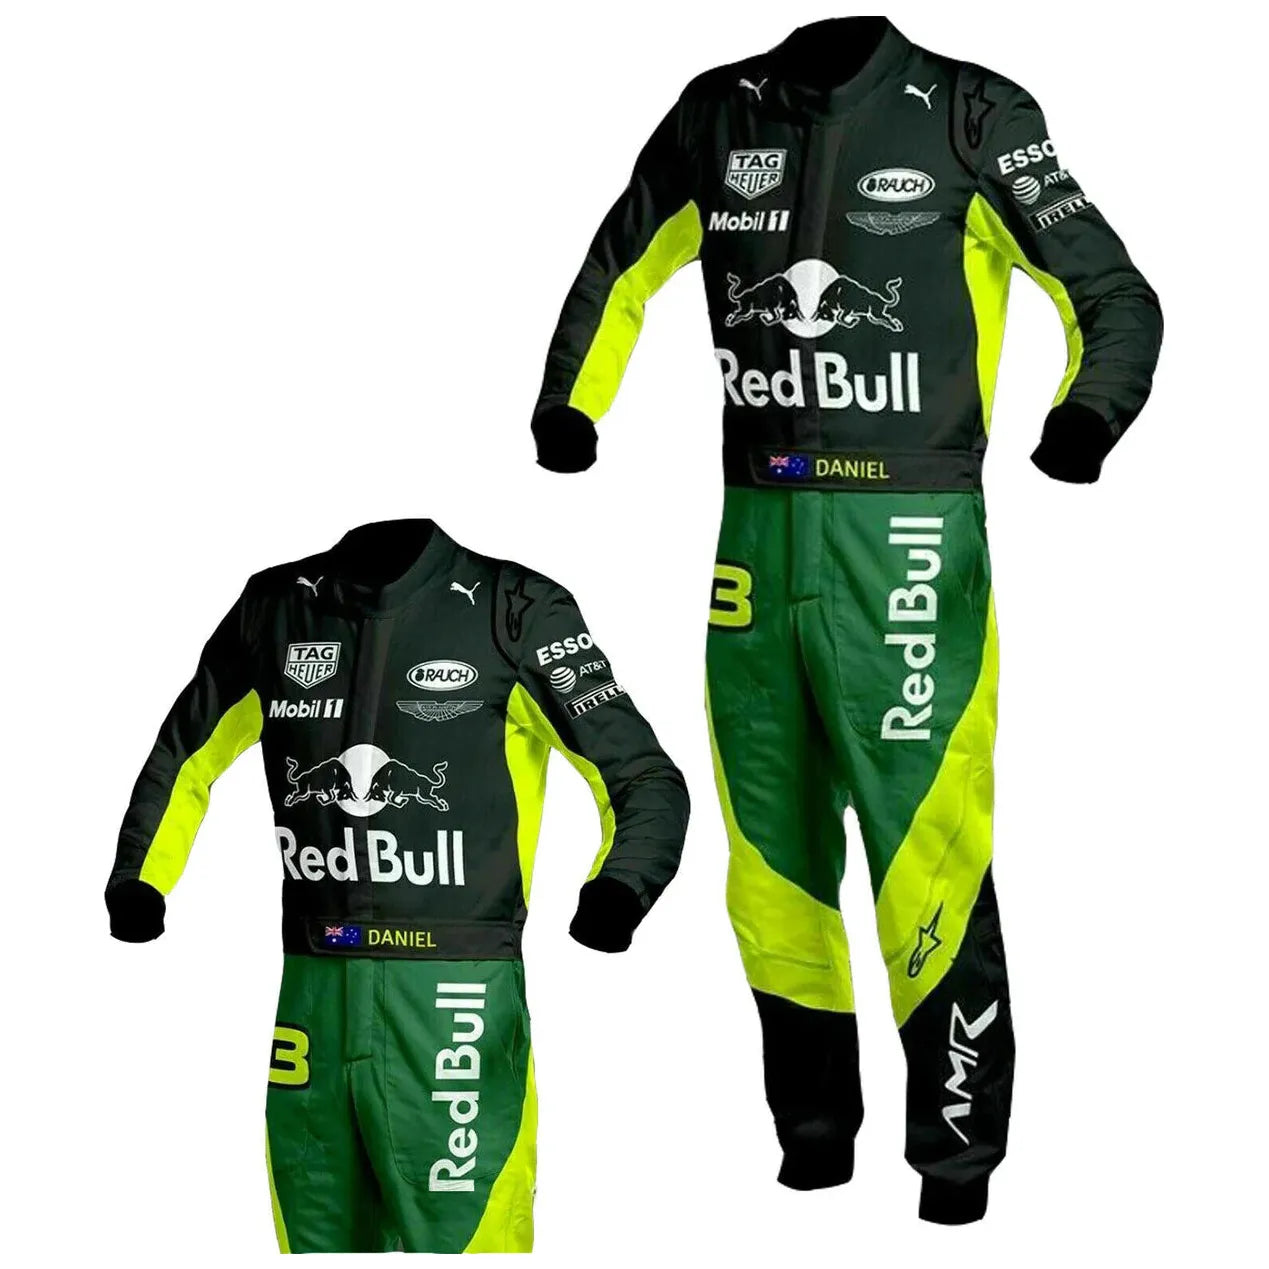 Go kart racing Sublimation Protective clothing Racing gear Suit N-037